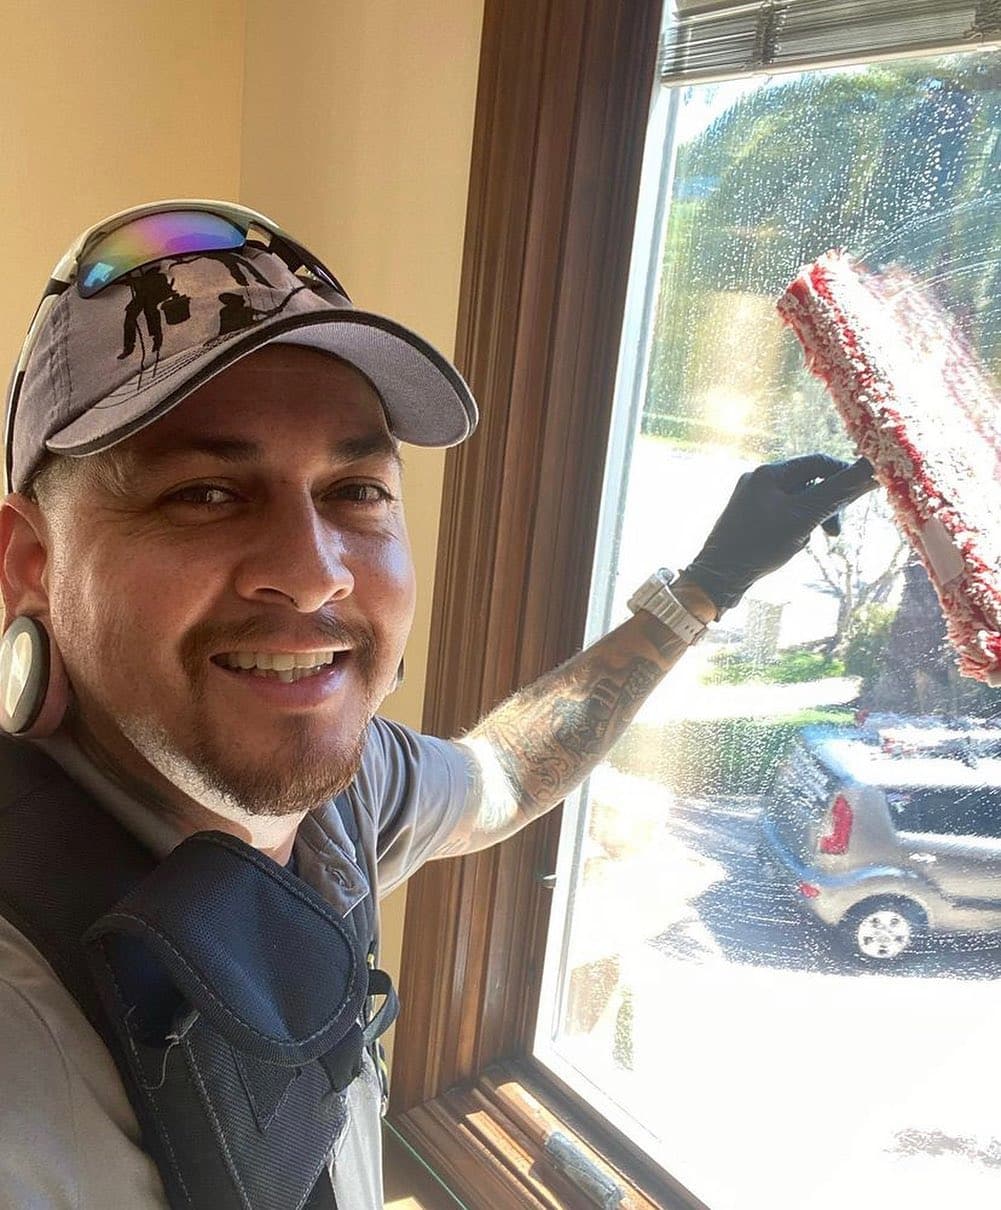 A man in a baseball cap and gloves holding a window cleaner.